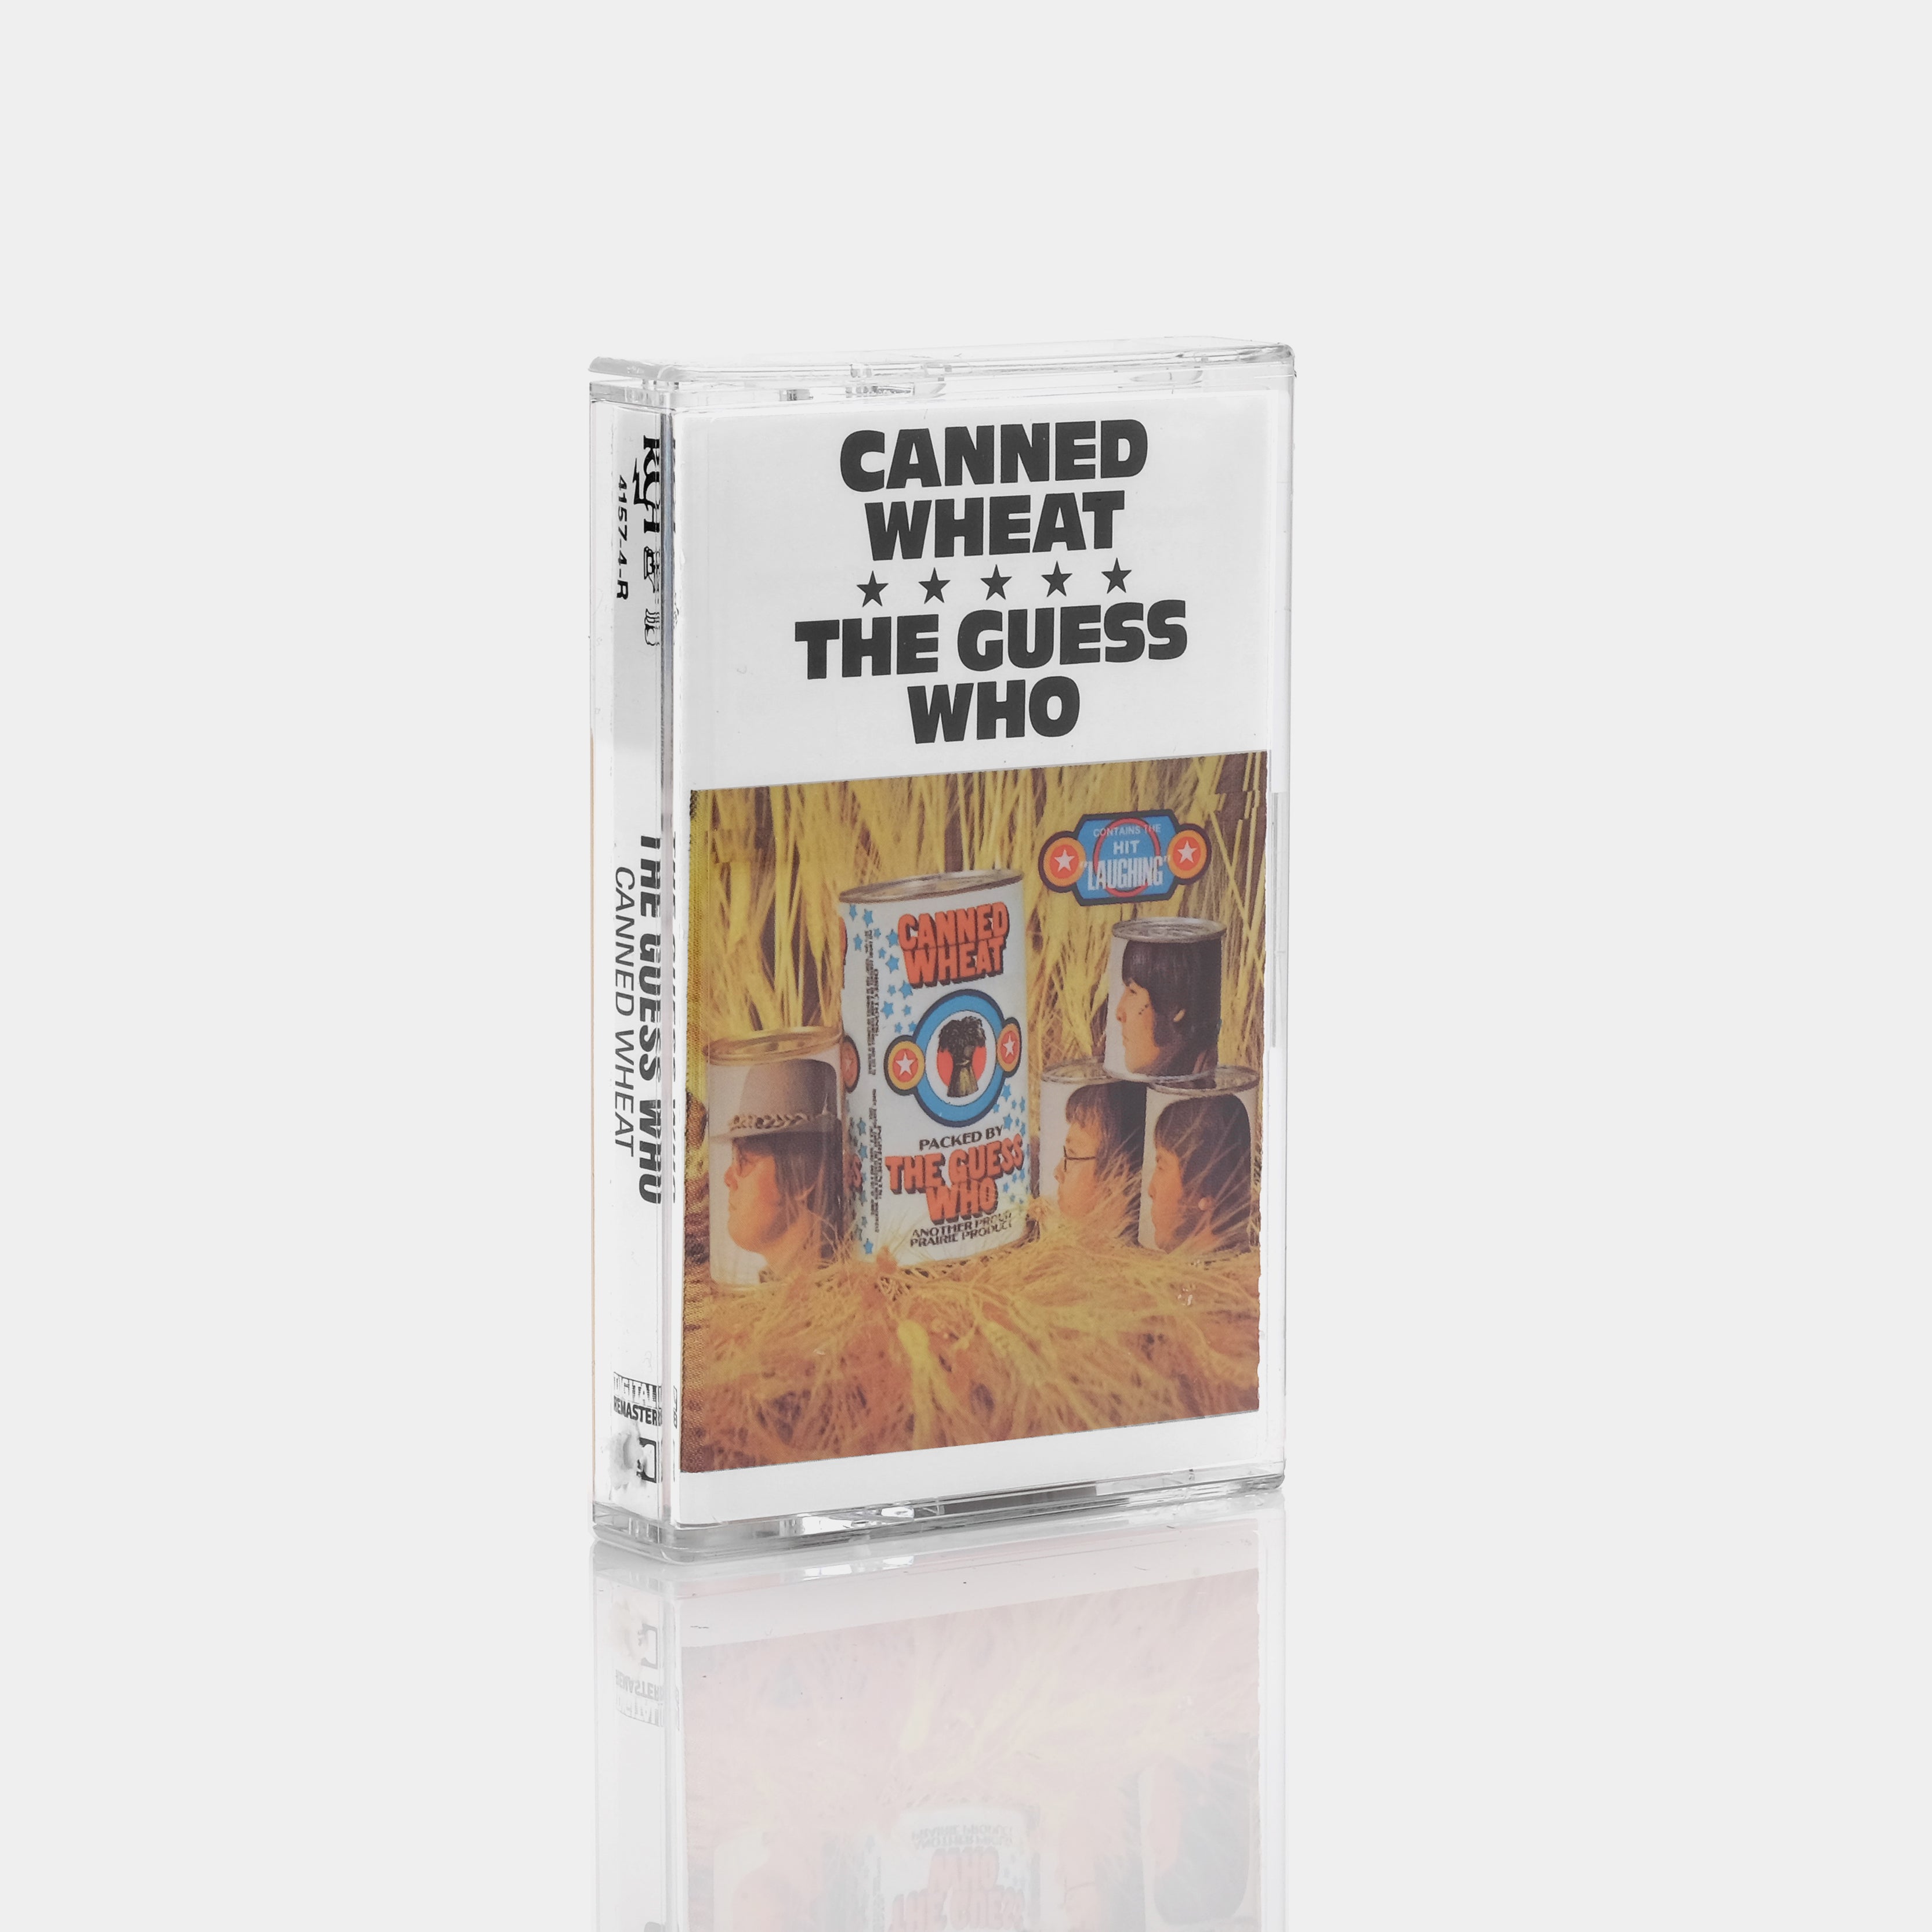 The Guess Who - Canned Wheat Cassette Tape